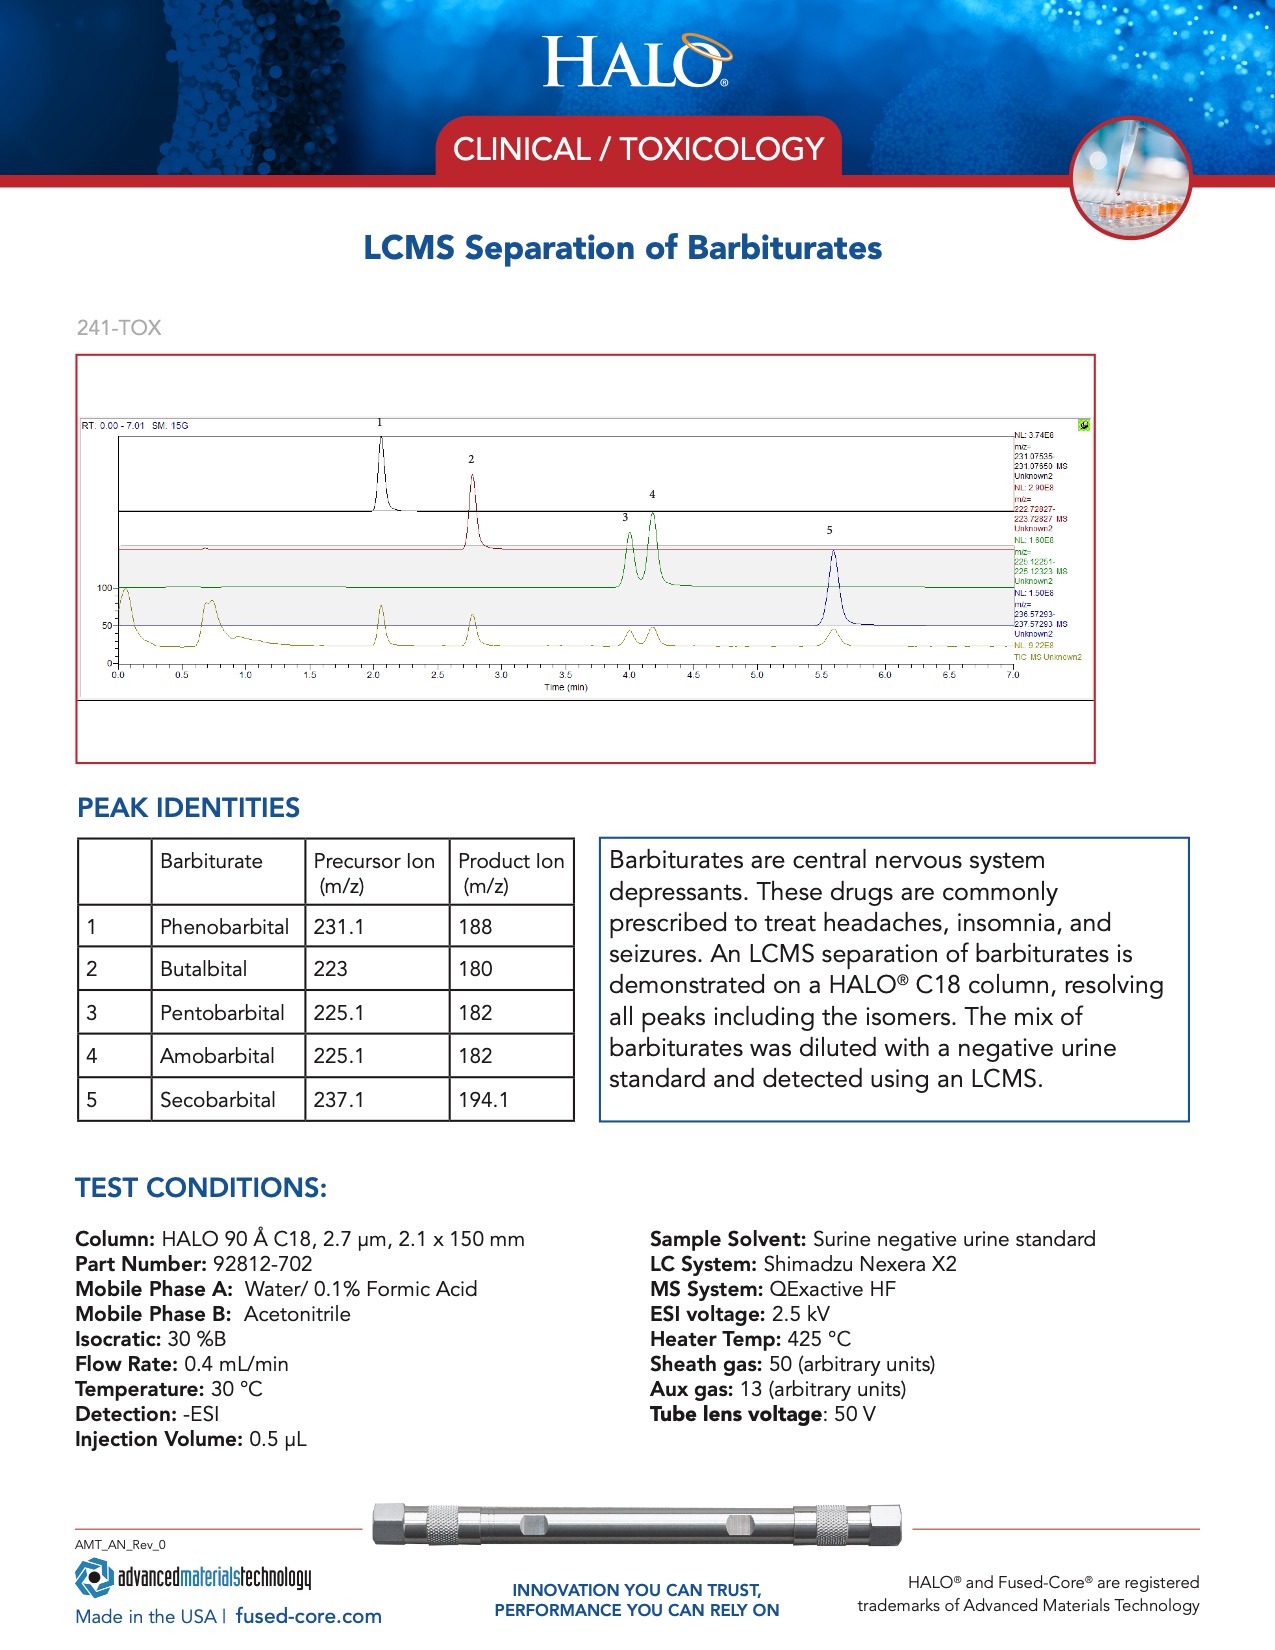 lcms separation of barbiturates - hplc for clinical toxicology testing